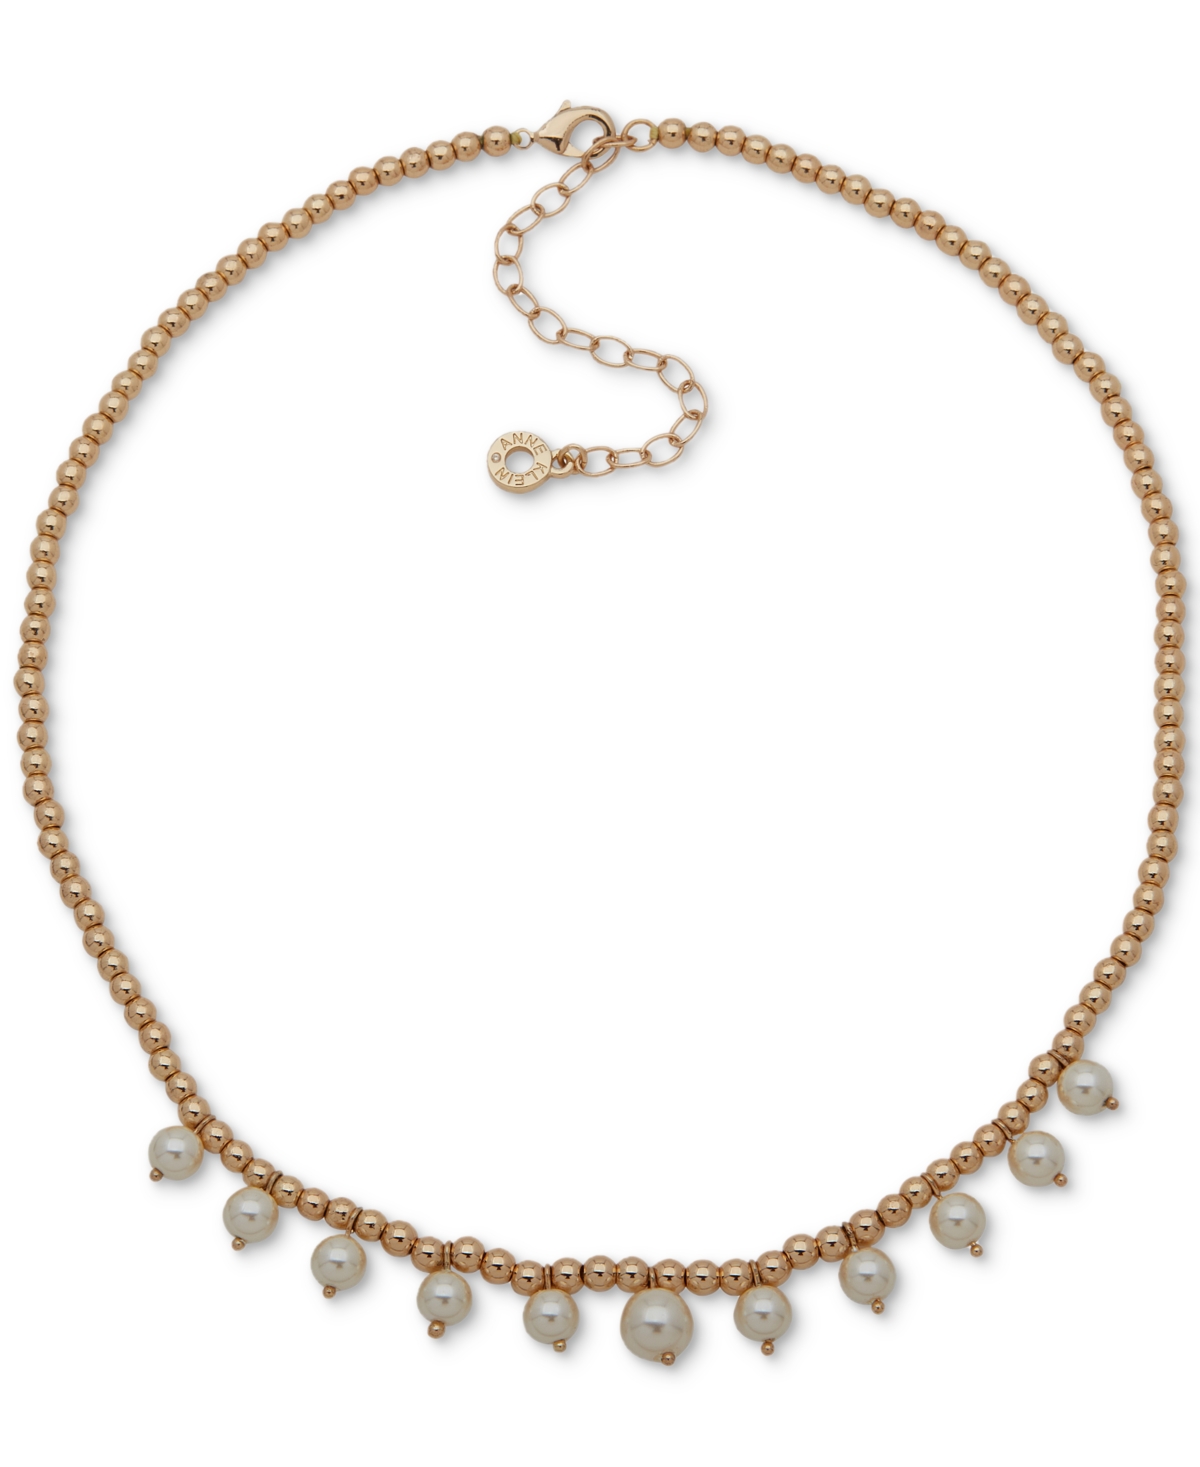 Gold-Tone Shaky Imitation Pearl Beaded Statement Necklace, 16" + 3" extender - Crystal